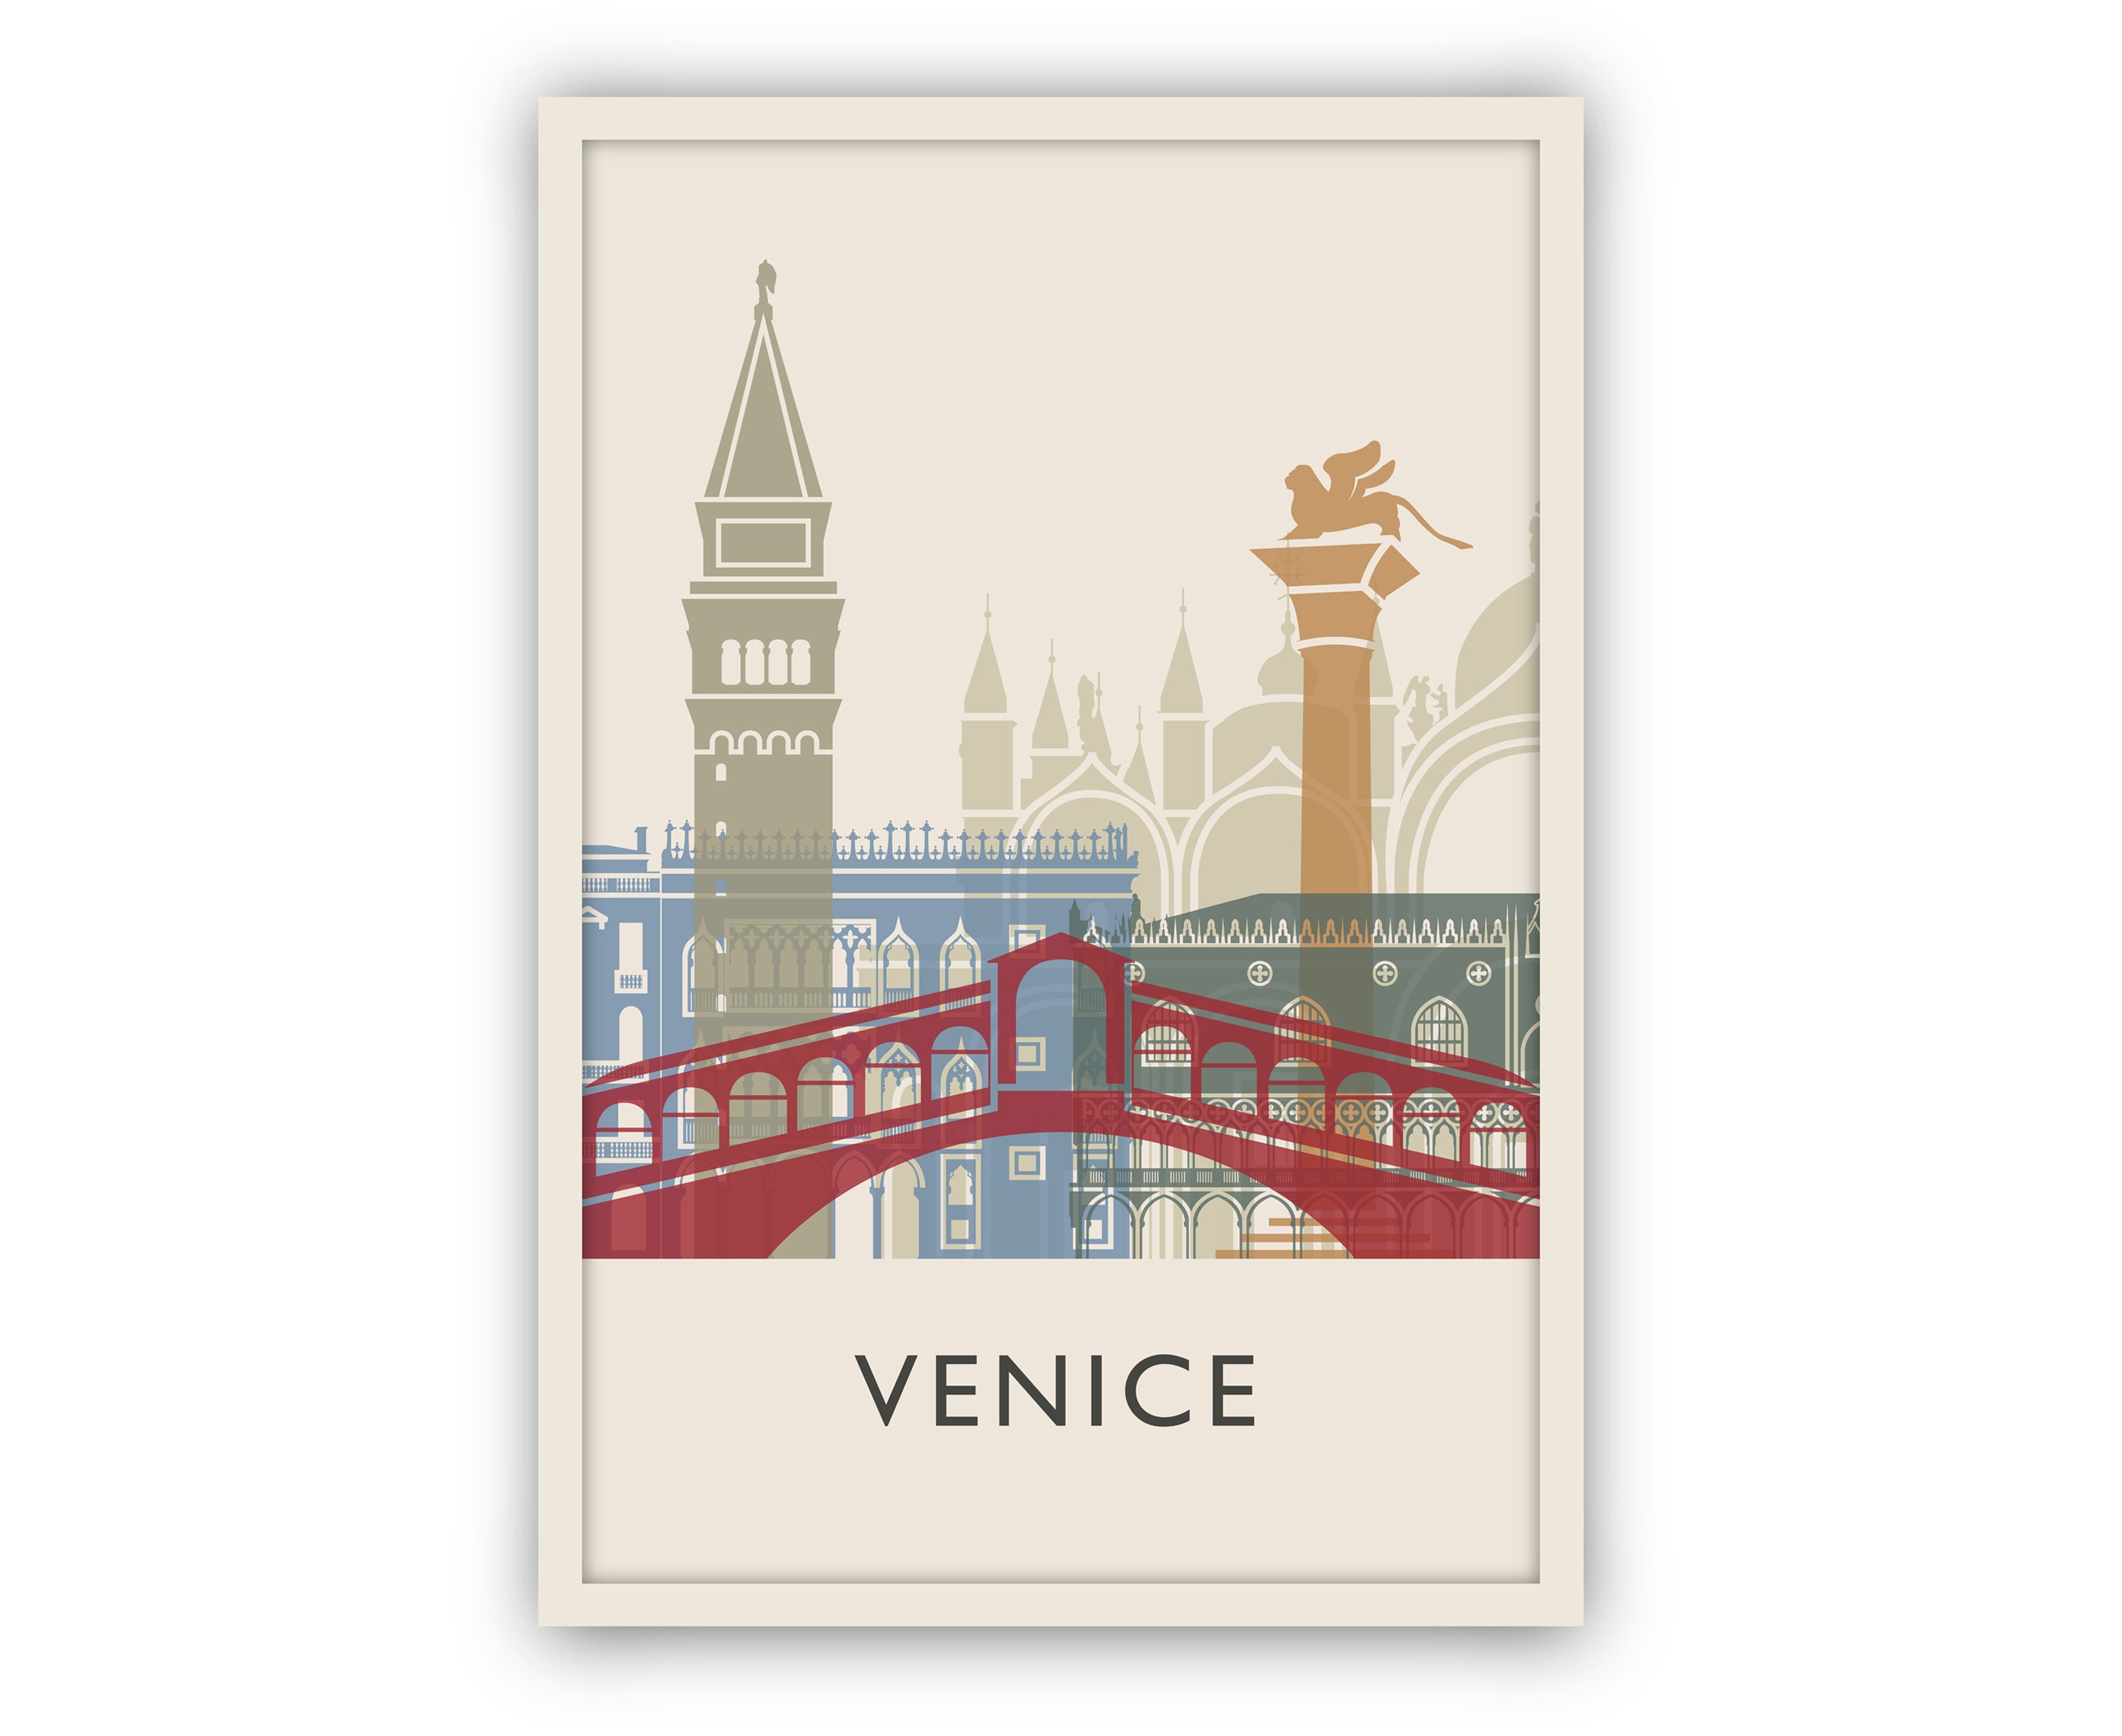 VENICE ITALY CITYSCAPE POSTER STYLE C 24x36 HI RES 